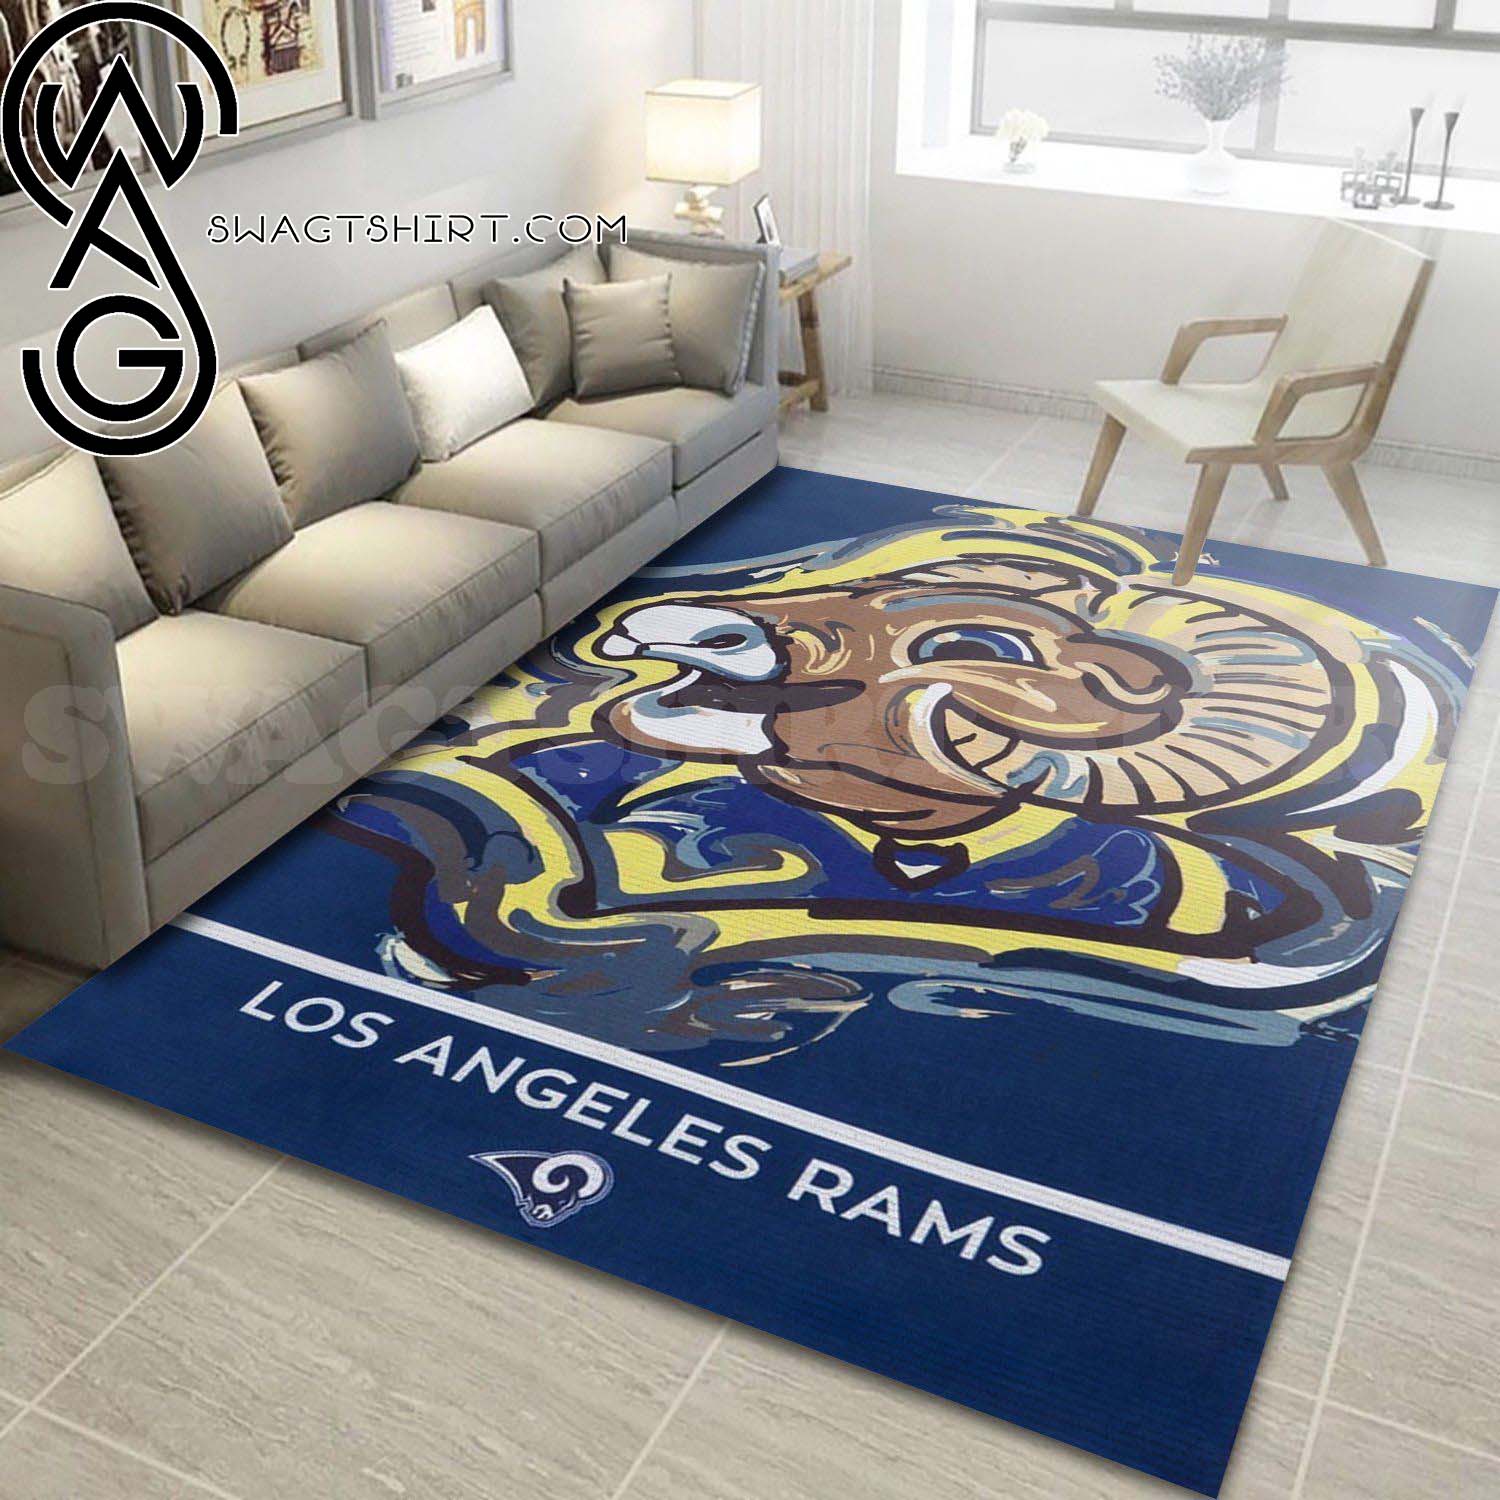 [Best selling products] Los Angeles Rams Paint Color Living Room Home Decor Area Rug